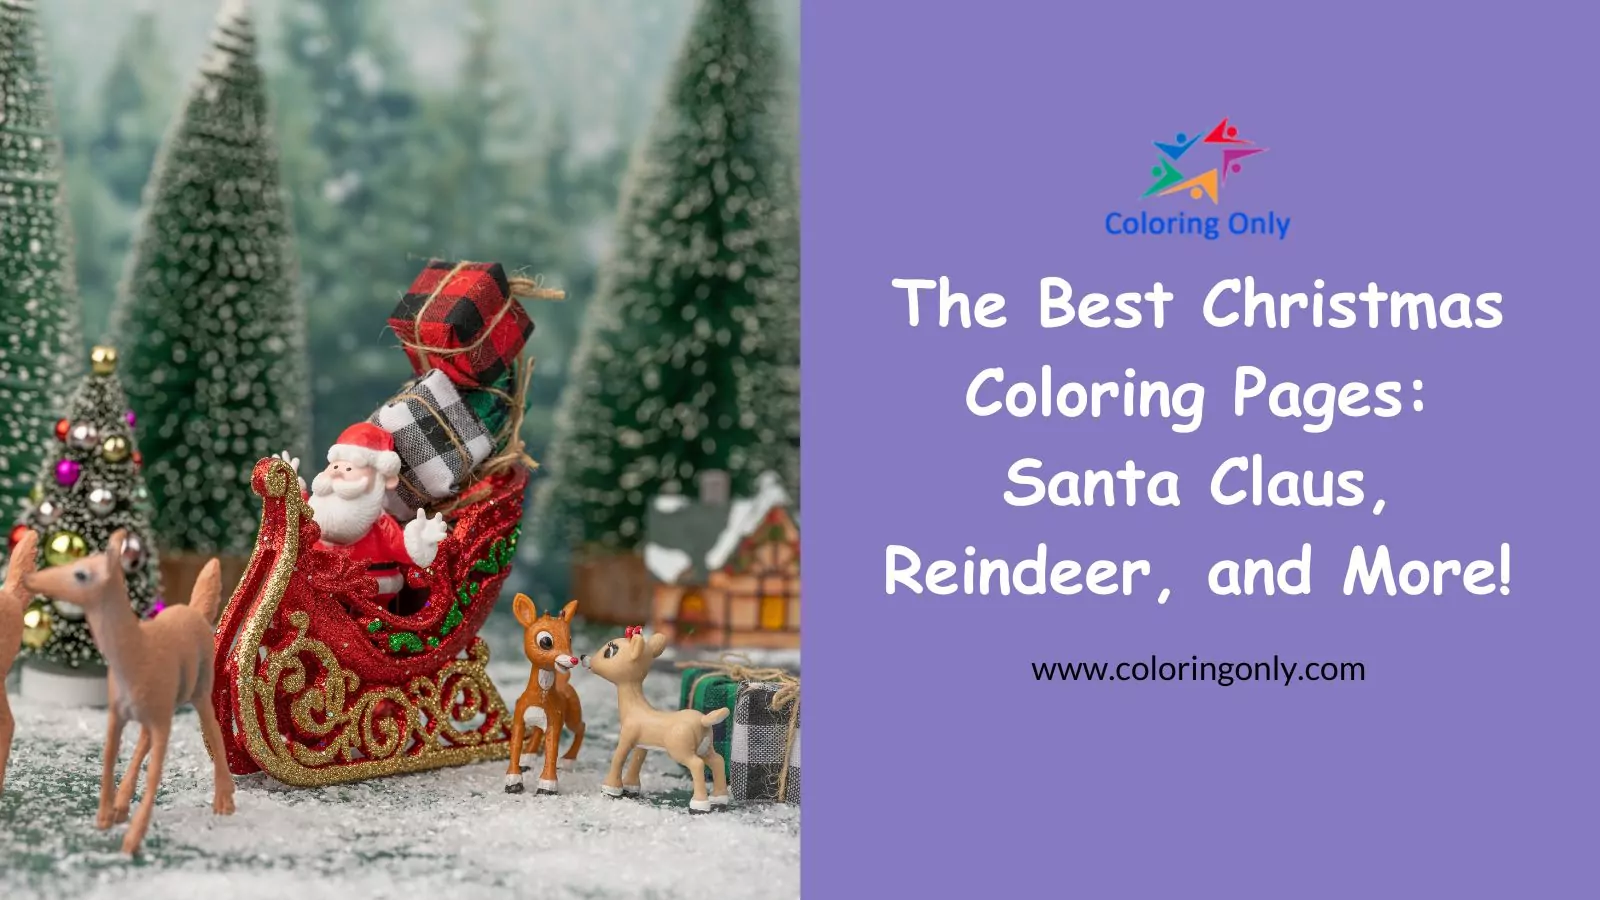 The Best Christmas Coloring Pages: Santa Claus, Reindeer, and More!